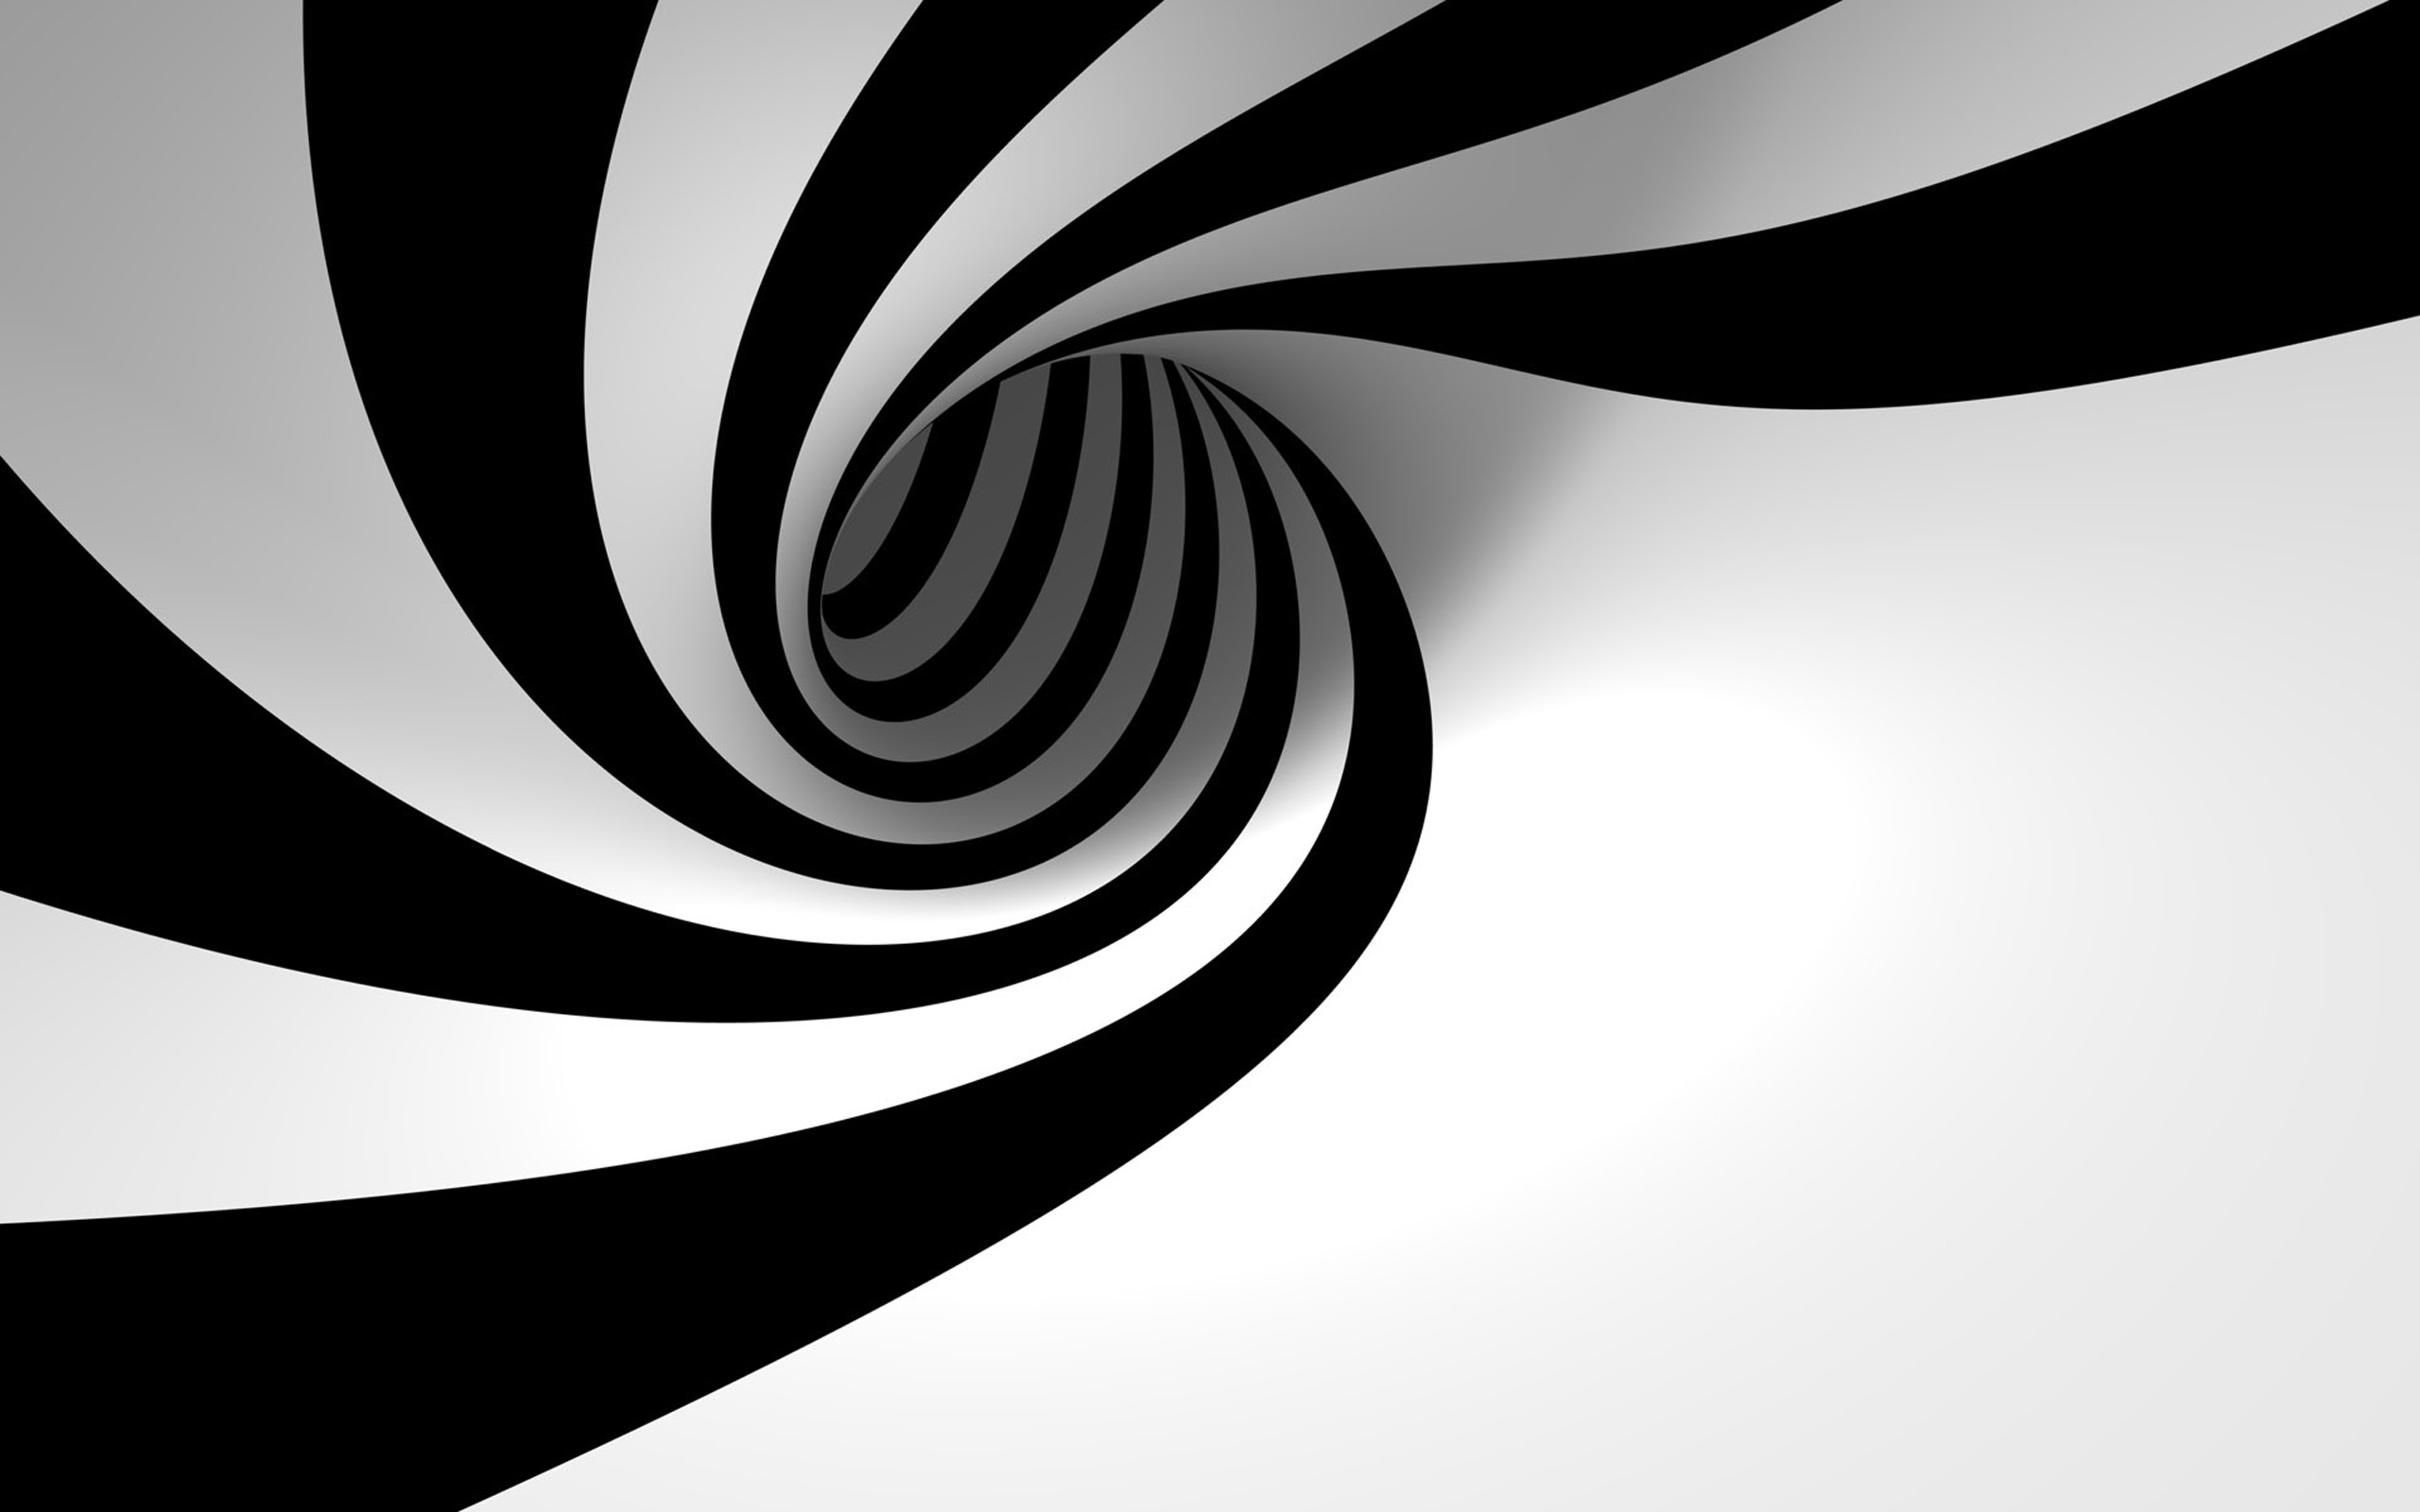 3d, View, Abstract, Black, And, White, Minimalistic, Hole, Spiral, Zebra, Stripes Wallpaper